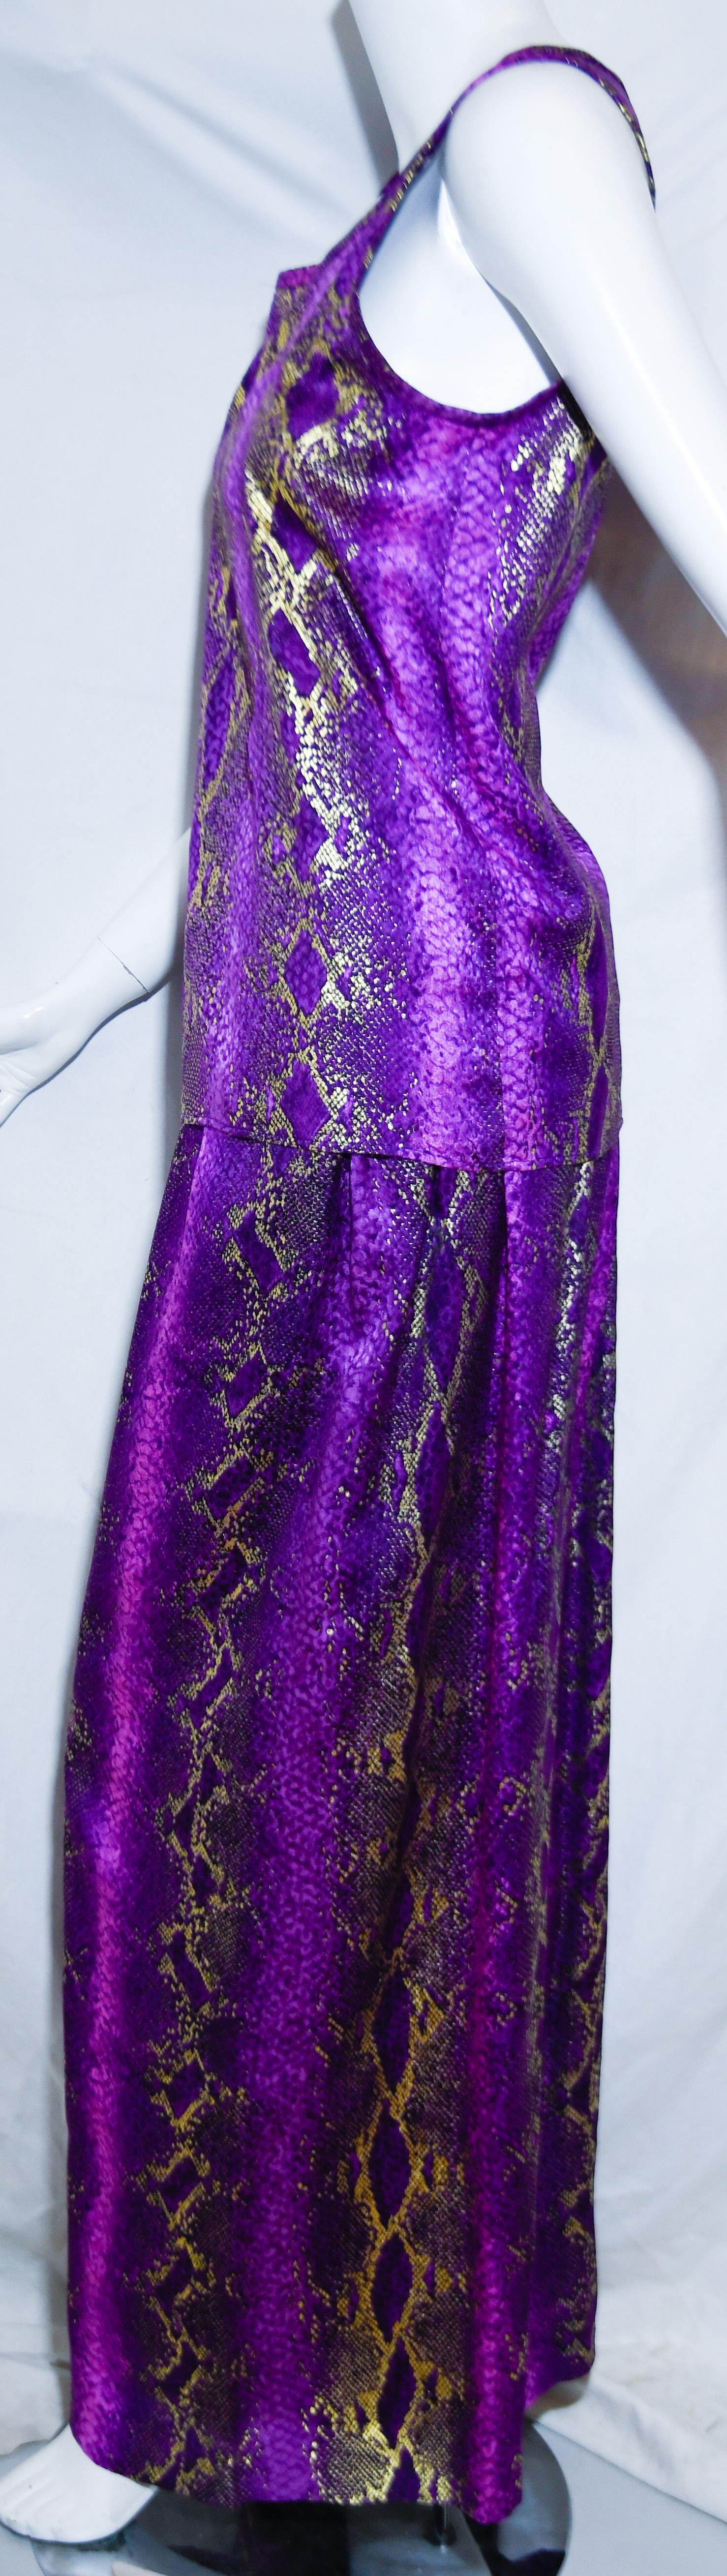 Yves Saint Laurent Rive Gauche purple and metallic gold snake print  2 piece pant set incorporates a sleeveless scoop neck top and a palazzo style wide slacks.  This striking ensemble is beautifully designed and created with the best purple silk